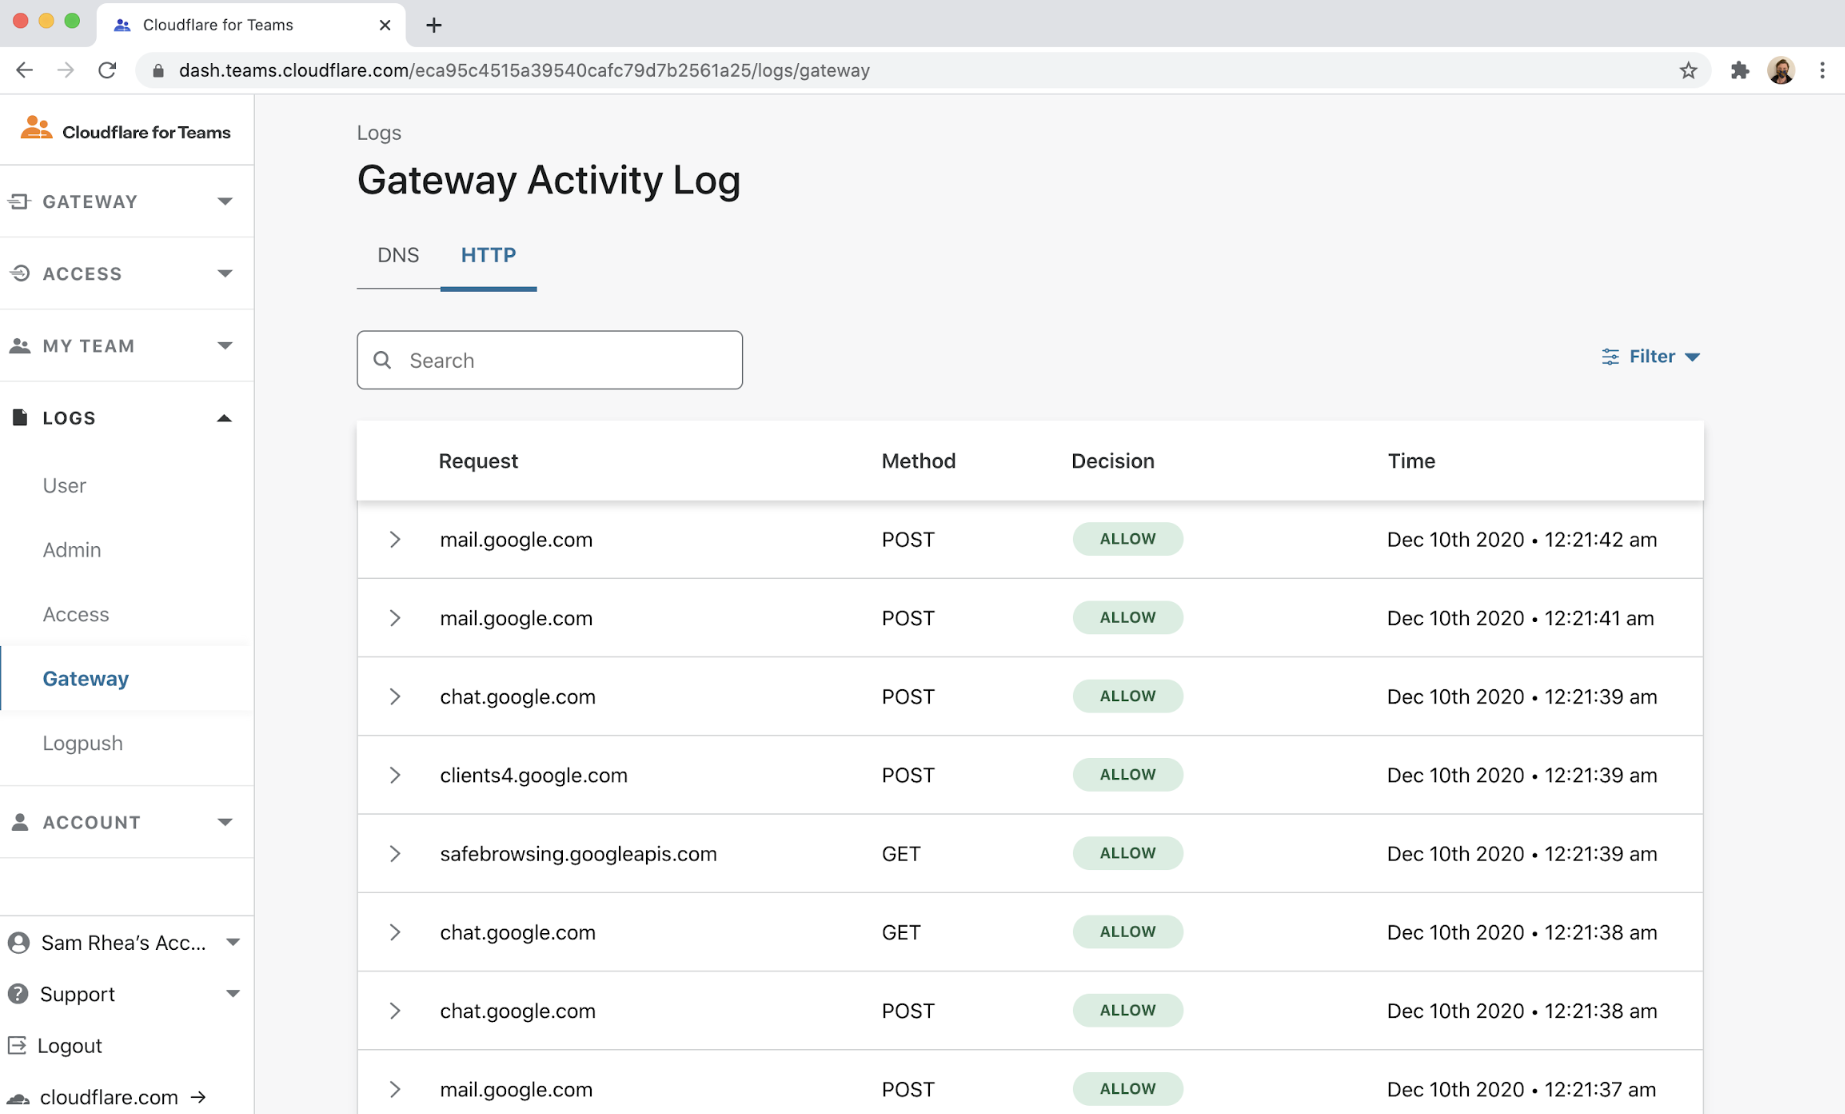 Integrating Cloudflare Gateway and Access